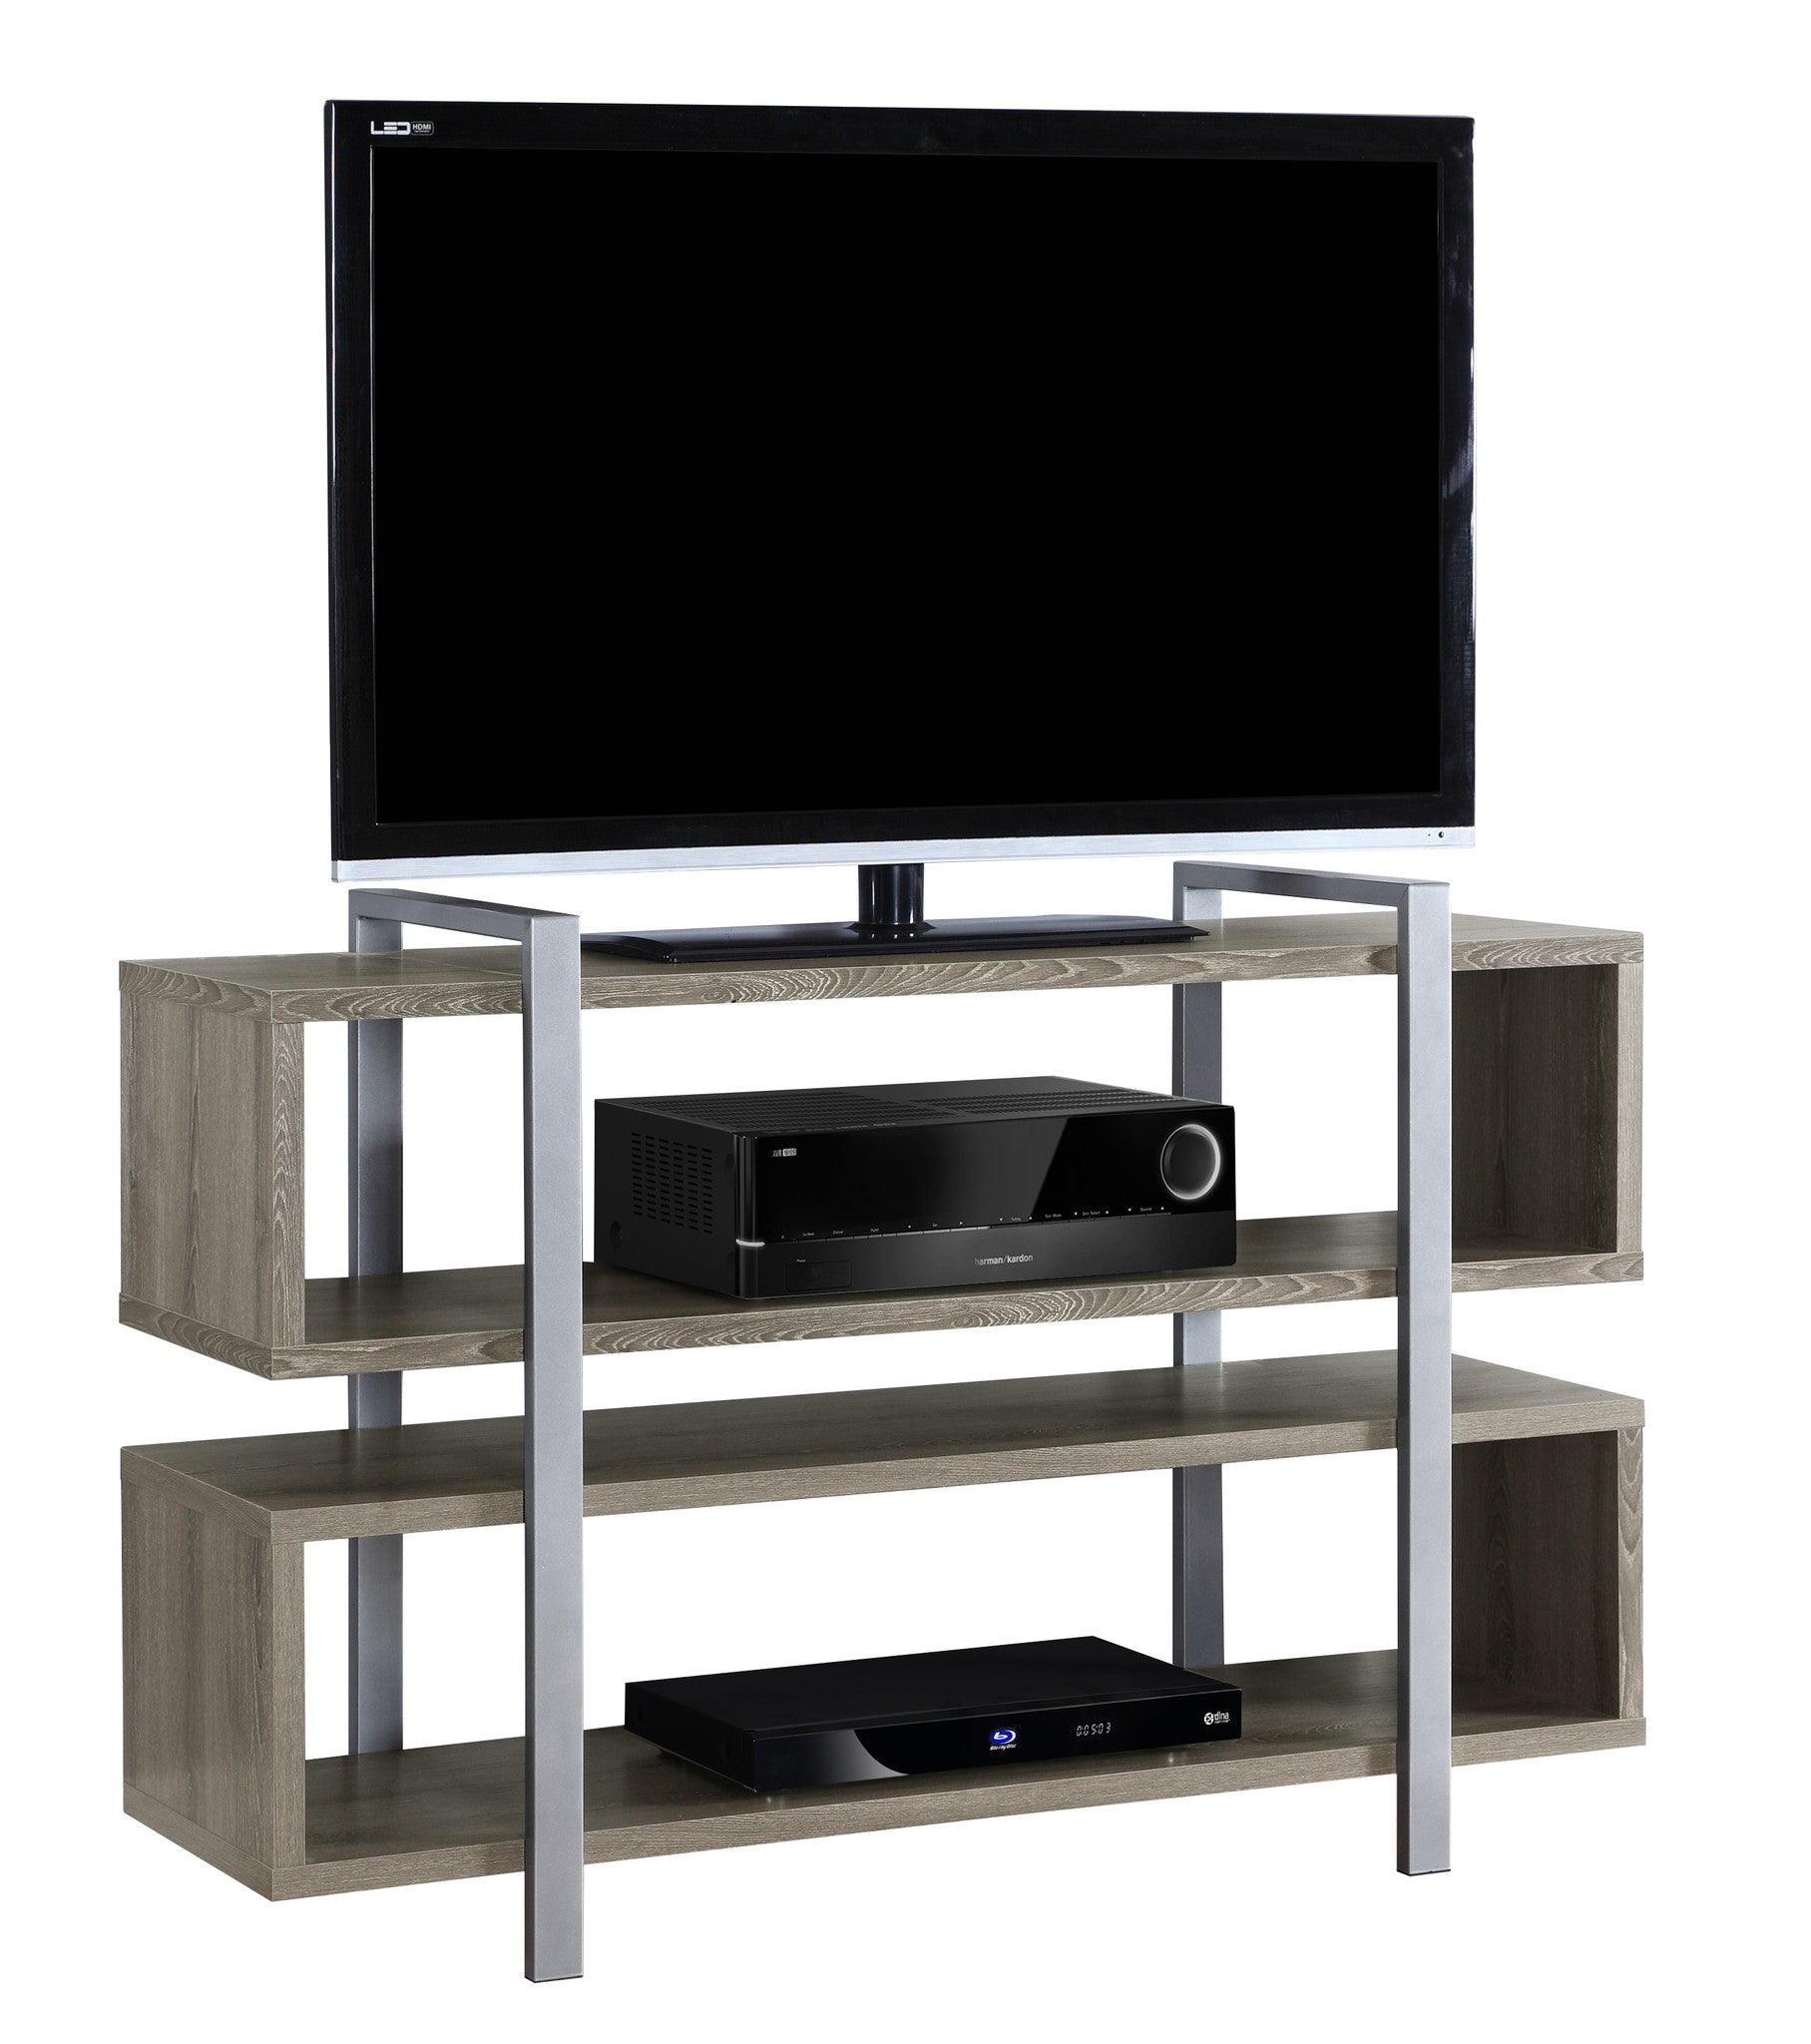 48 L X 32 H Dark Taupe Bookcase And Tv Stand The Office